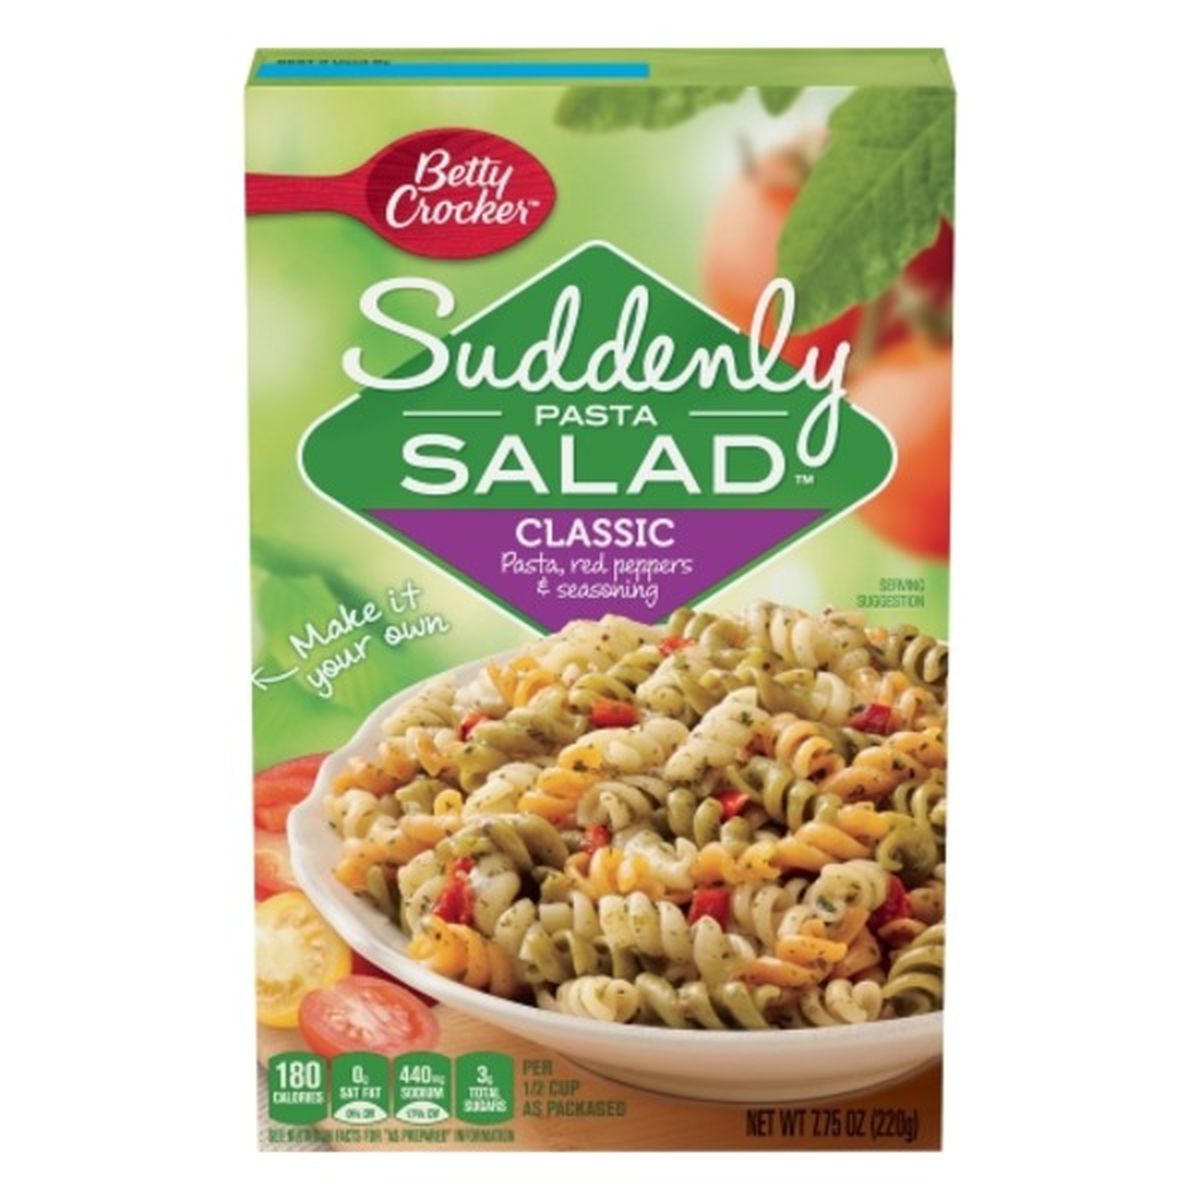 Calories in Suddenly Pasta Salad Suddenly Salad Pasta, Classic